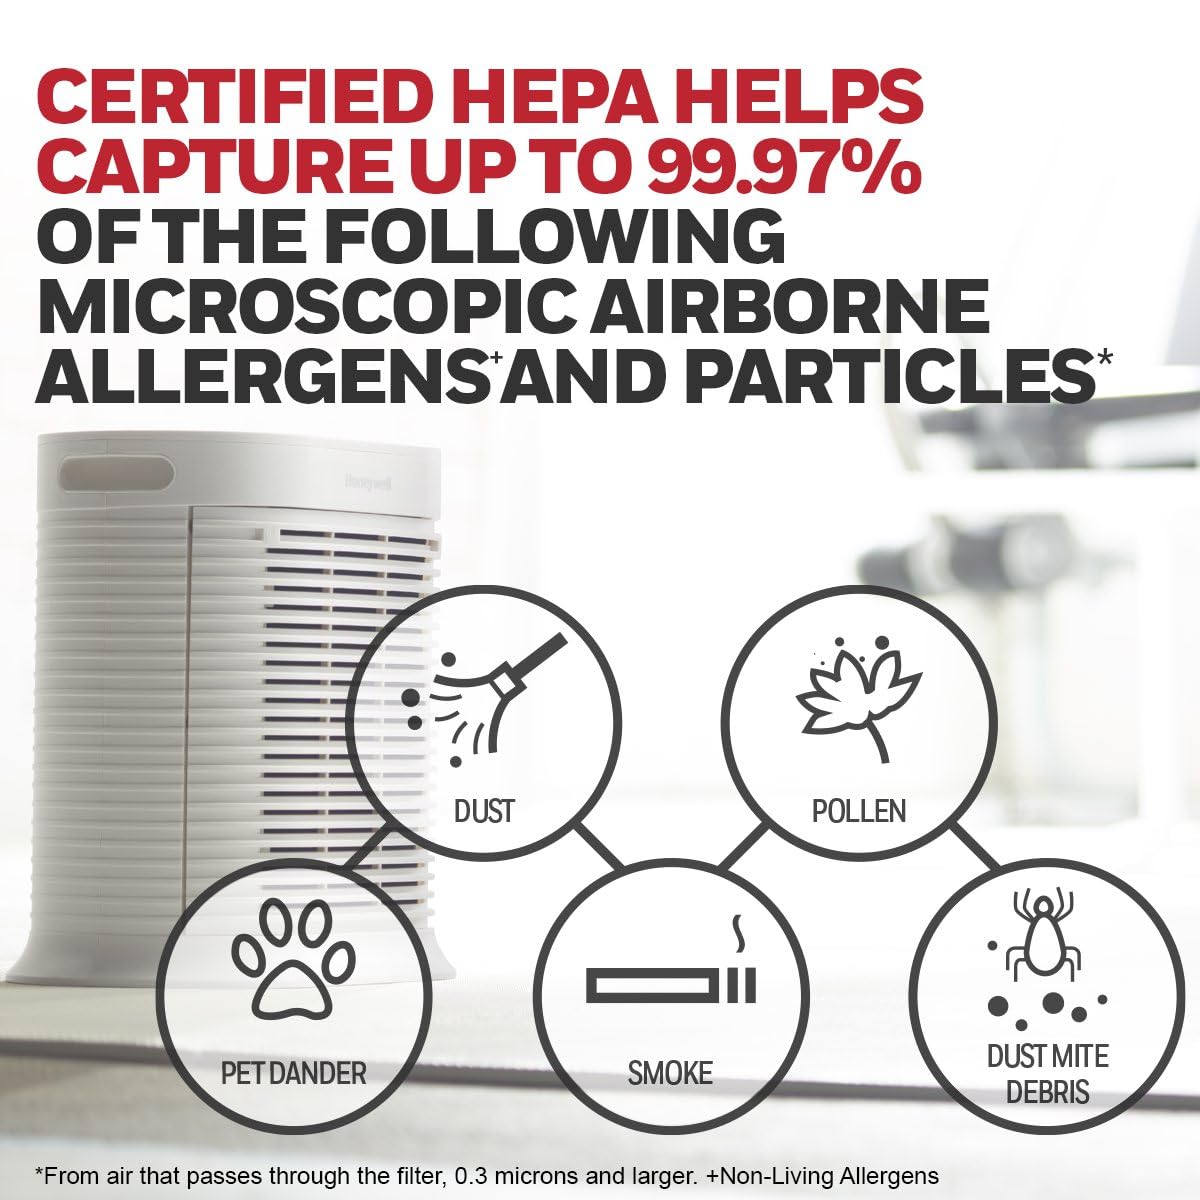 Honeywell HPA204 HEPA Air Purifier for Large Rooms - Microscopic Airborne Allergen+ Reducer, Cleans Up To 1500 Sq Ft in 1 Hour - Wildfire/Smoke, Pollen, Pet Dander, and Dust Air Purifier – White